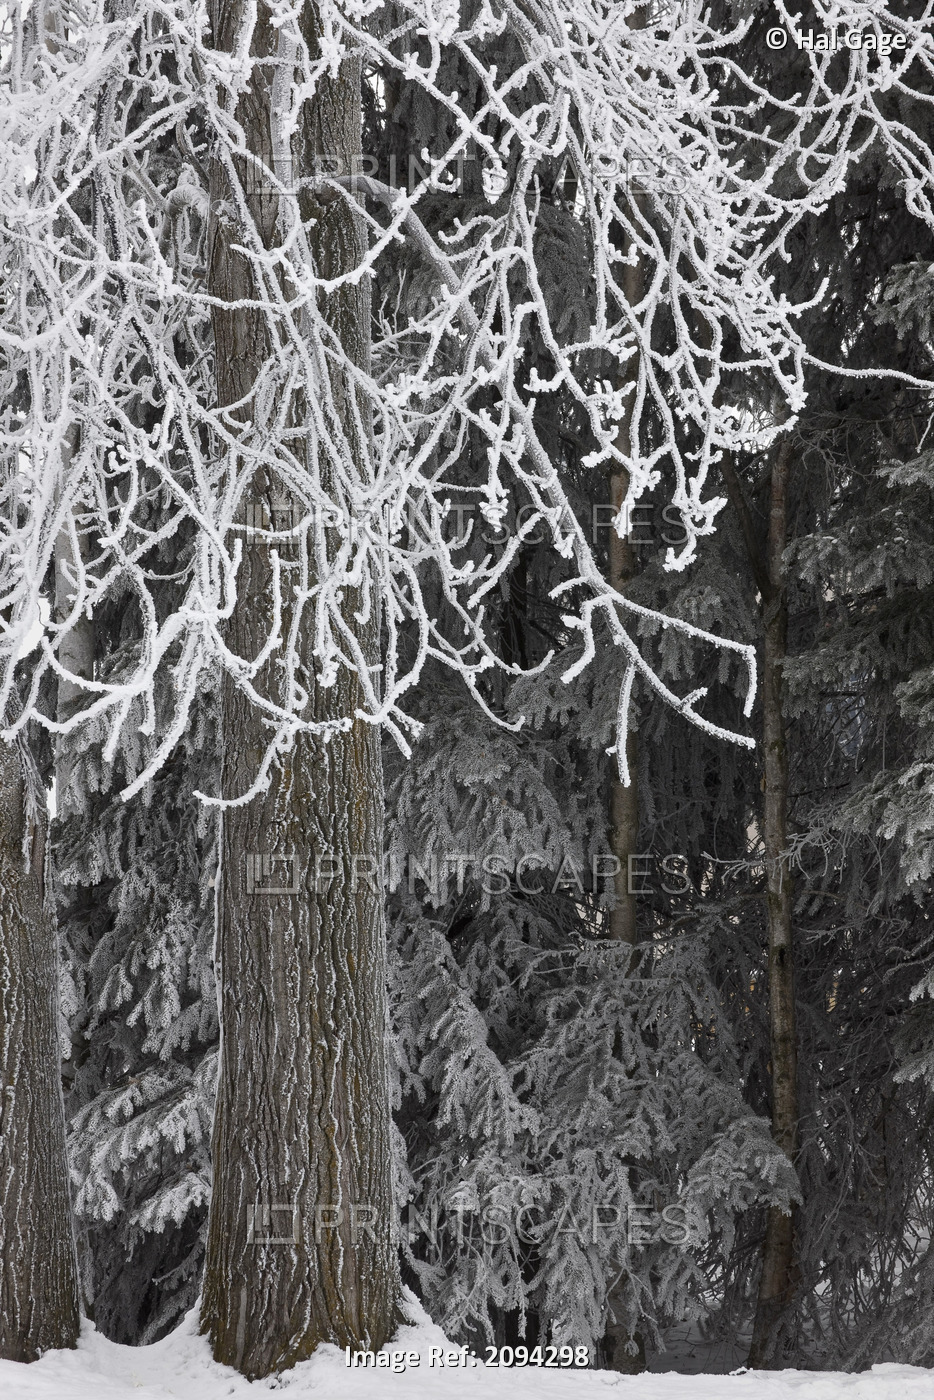 Hoar Frost On Deciduous And Conifer Trees At Russian Jack Park Golf Course In ...